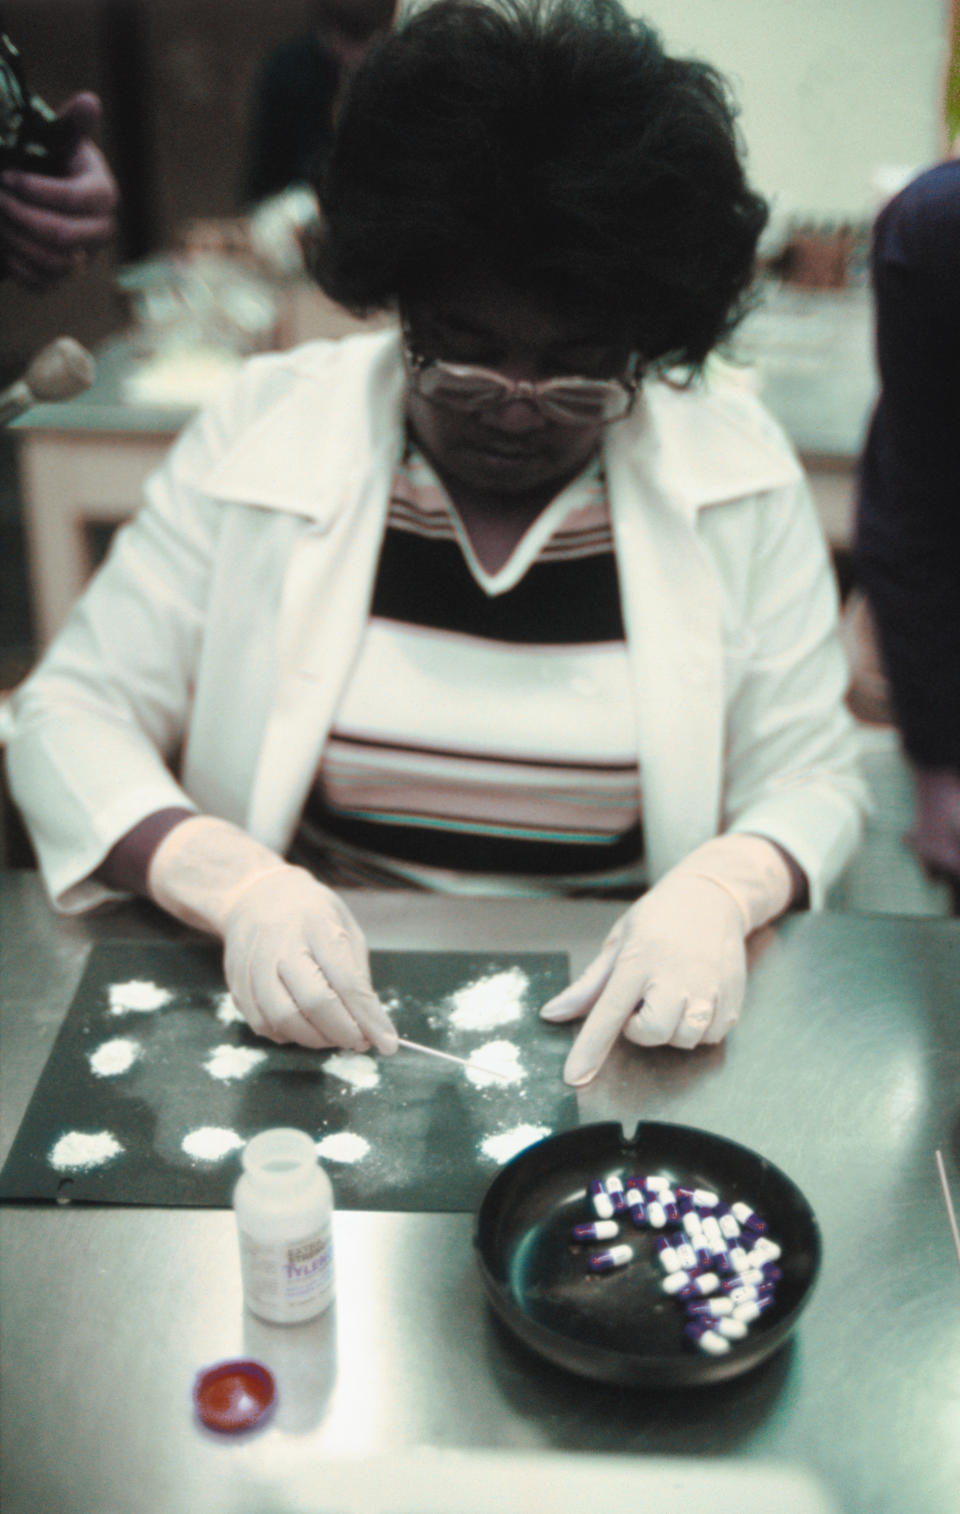 Lab technician testing Tylenol capsules. Source: Getty Images